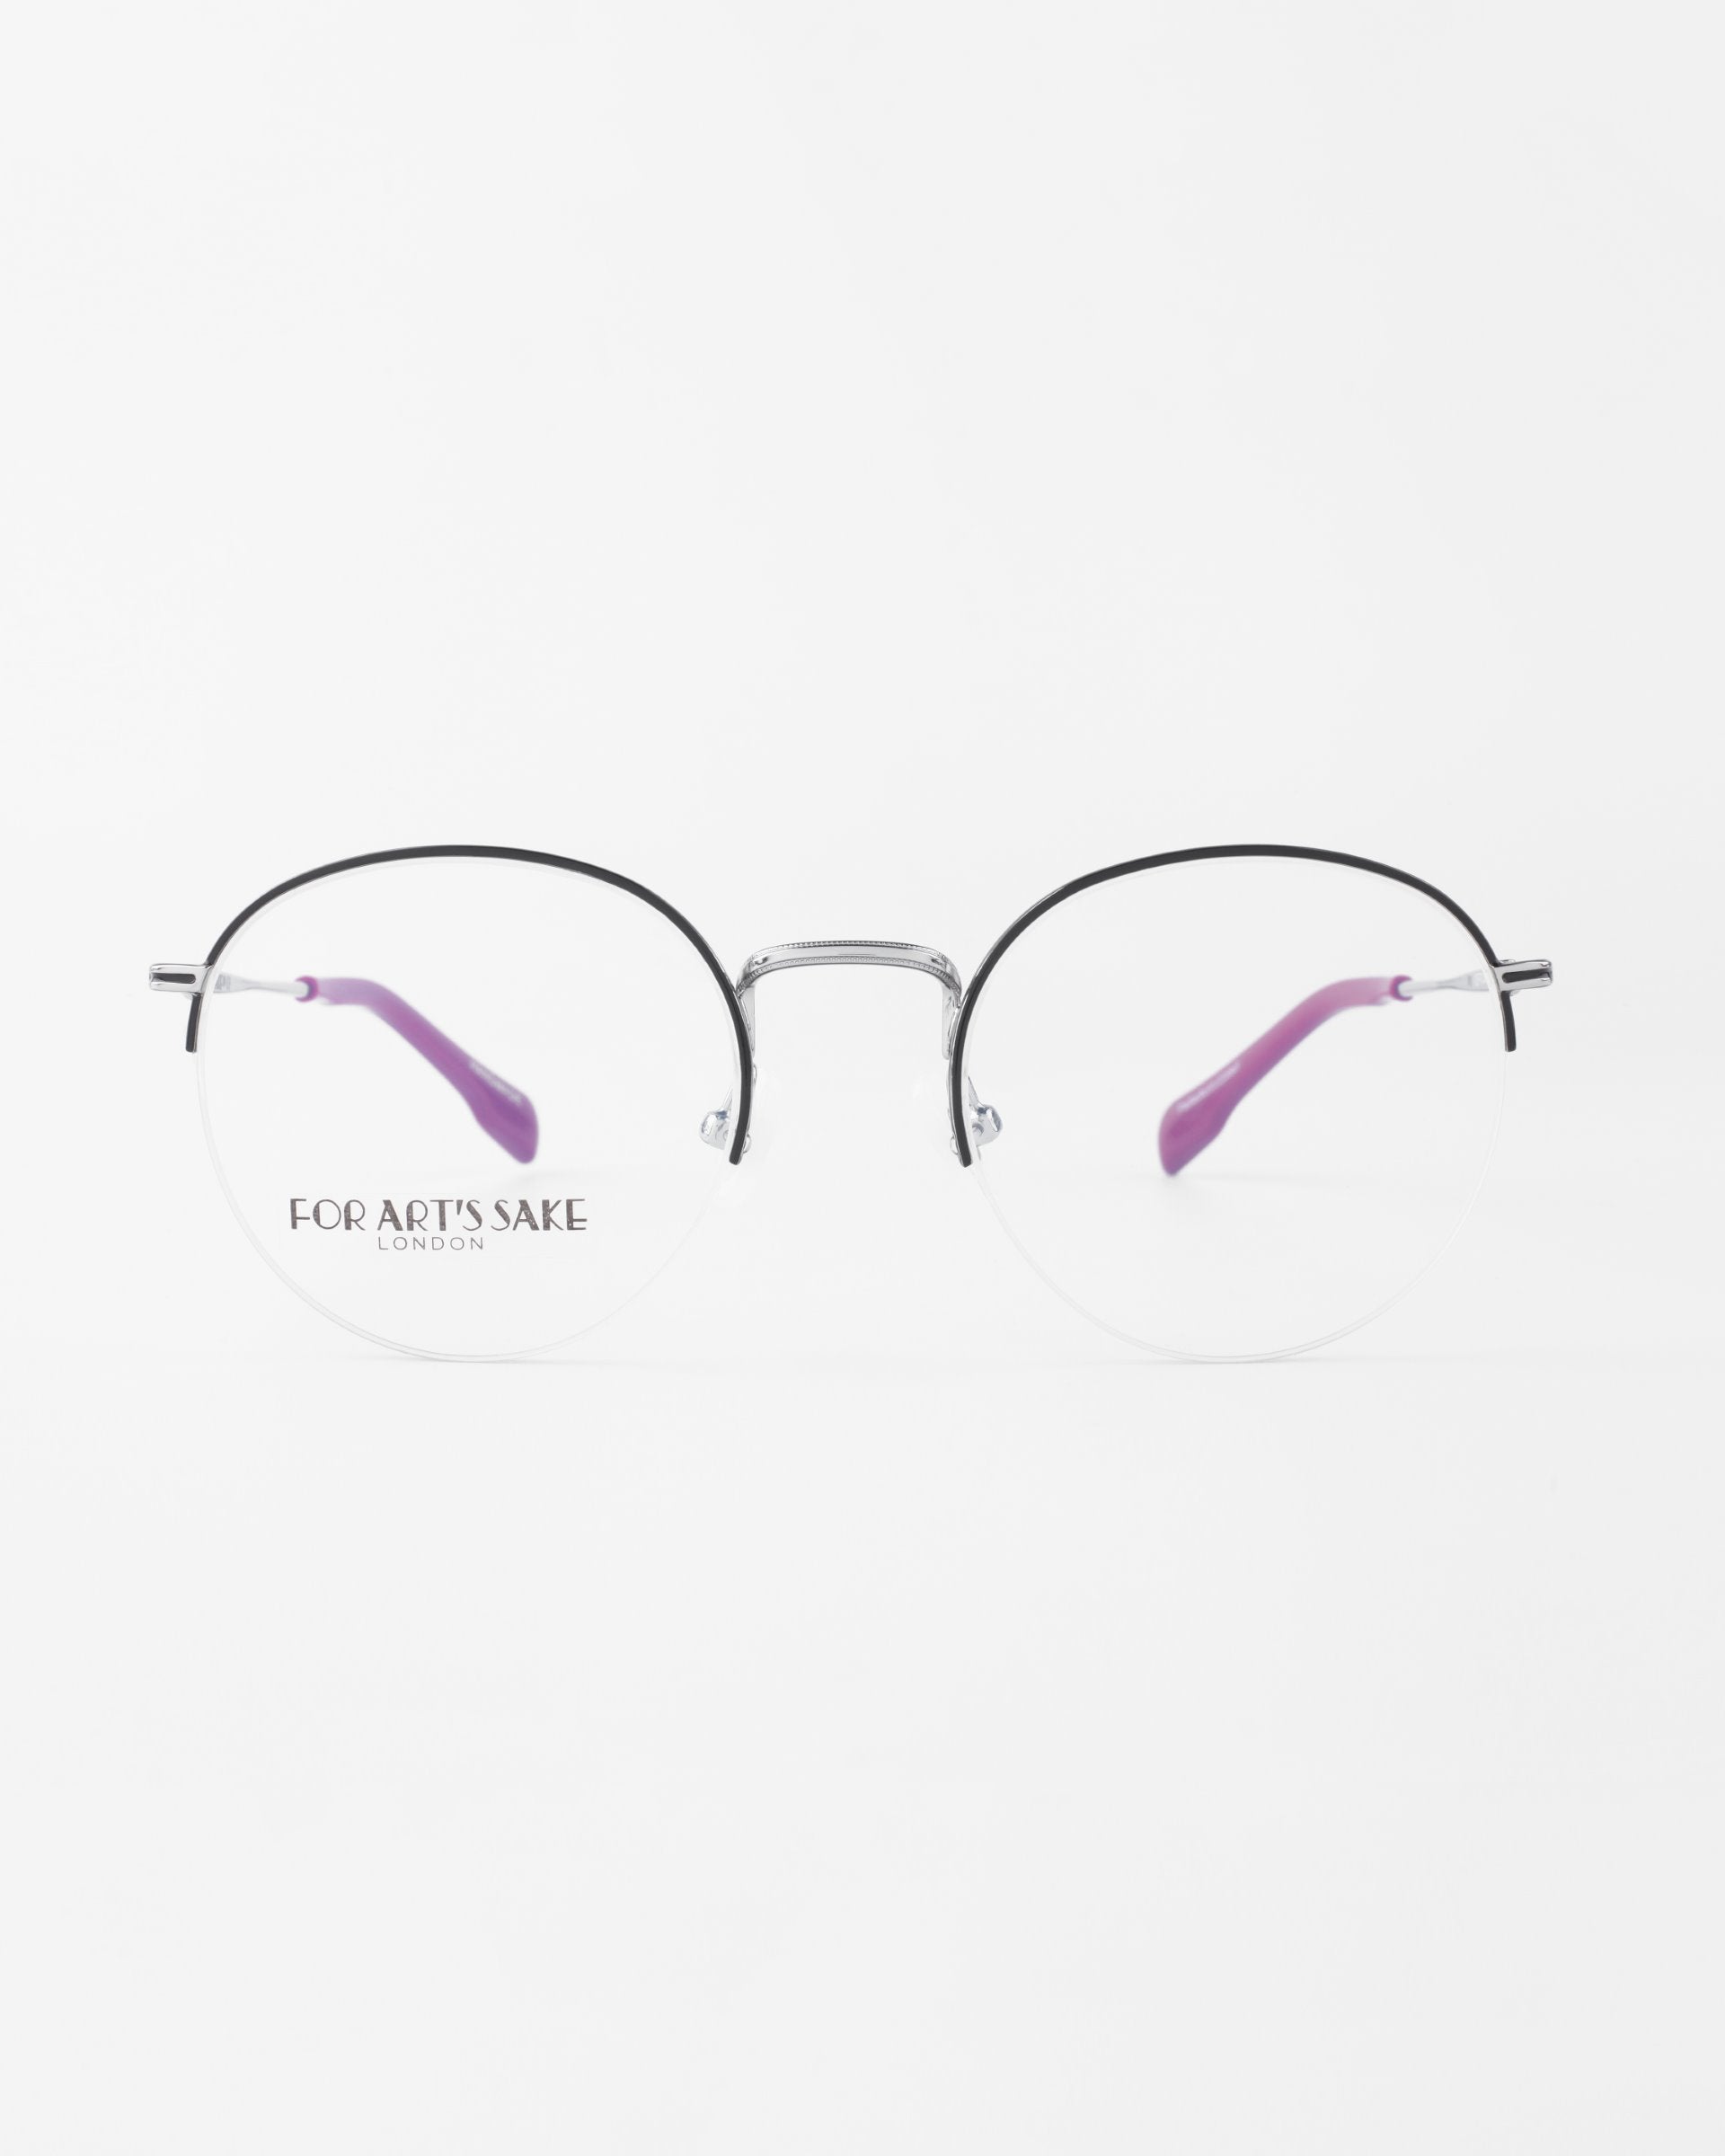 A pair of round, silver-framed glasses with purple, slightly curved earpieces. One lens has the text "For Art's Sake®" printed on it. Offering blue light filter technology, these stylish frames are perfect for the modern, tech-savvy individual. The background is plain white. The product name is Ivy from For Art's Sake®.